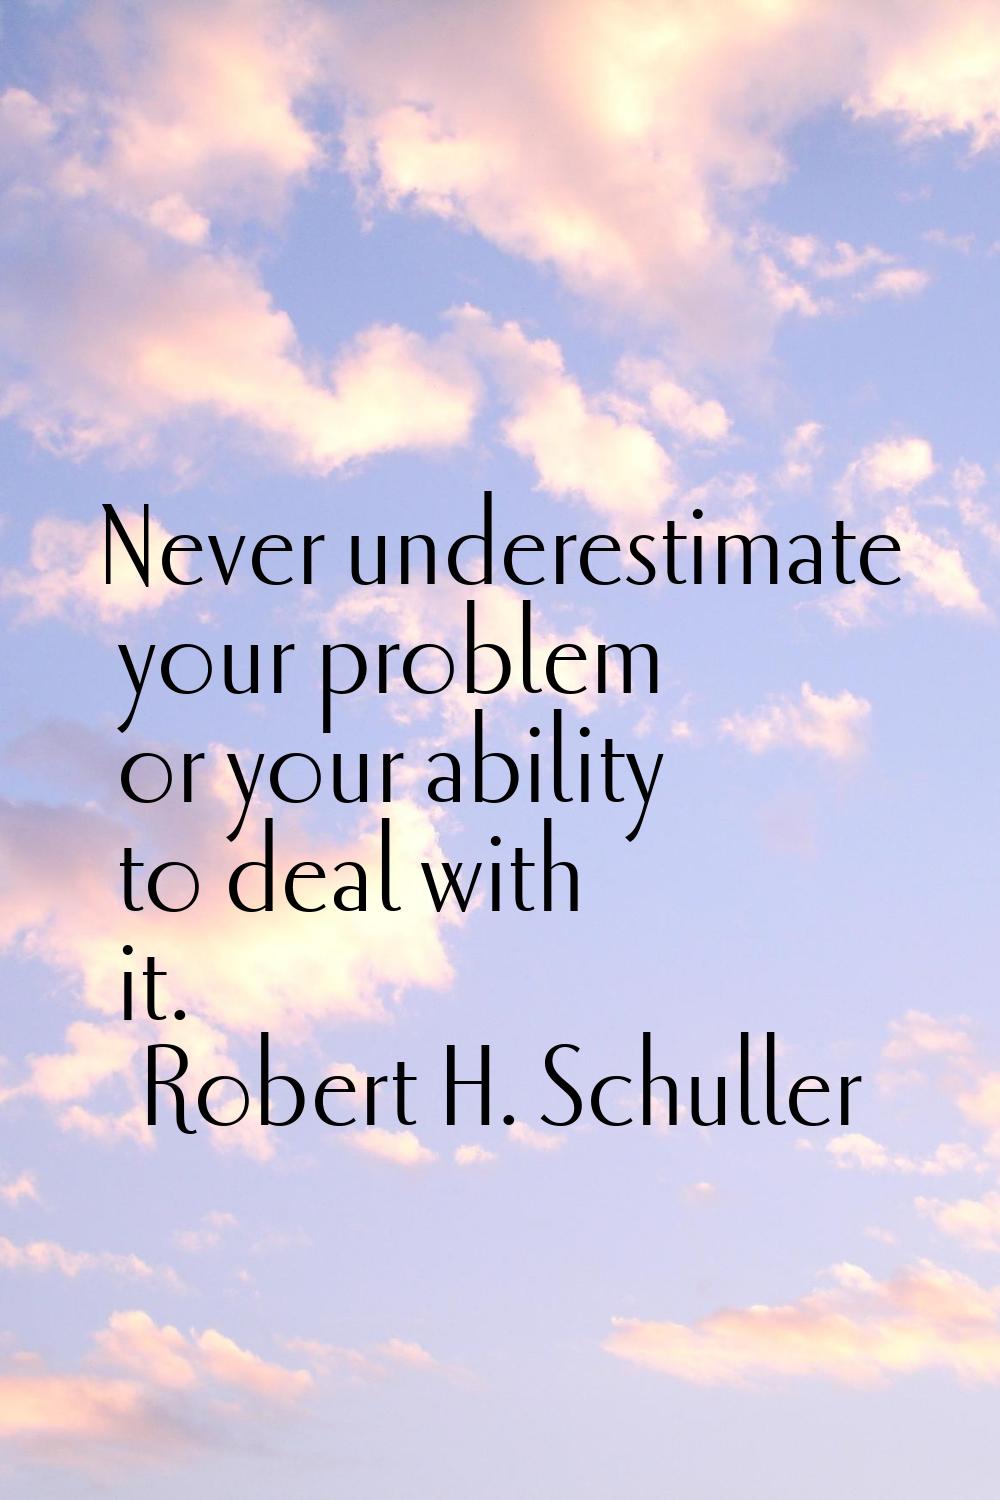 Never underestimate your problem or your ability to deal with it.